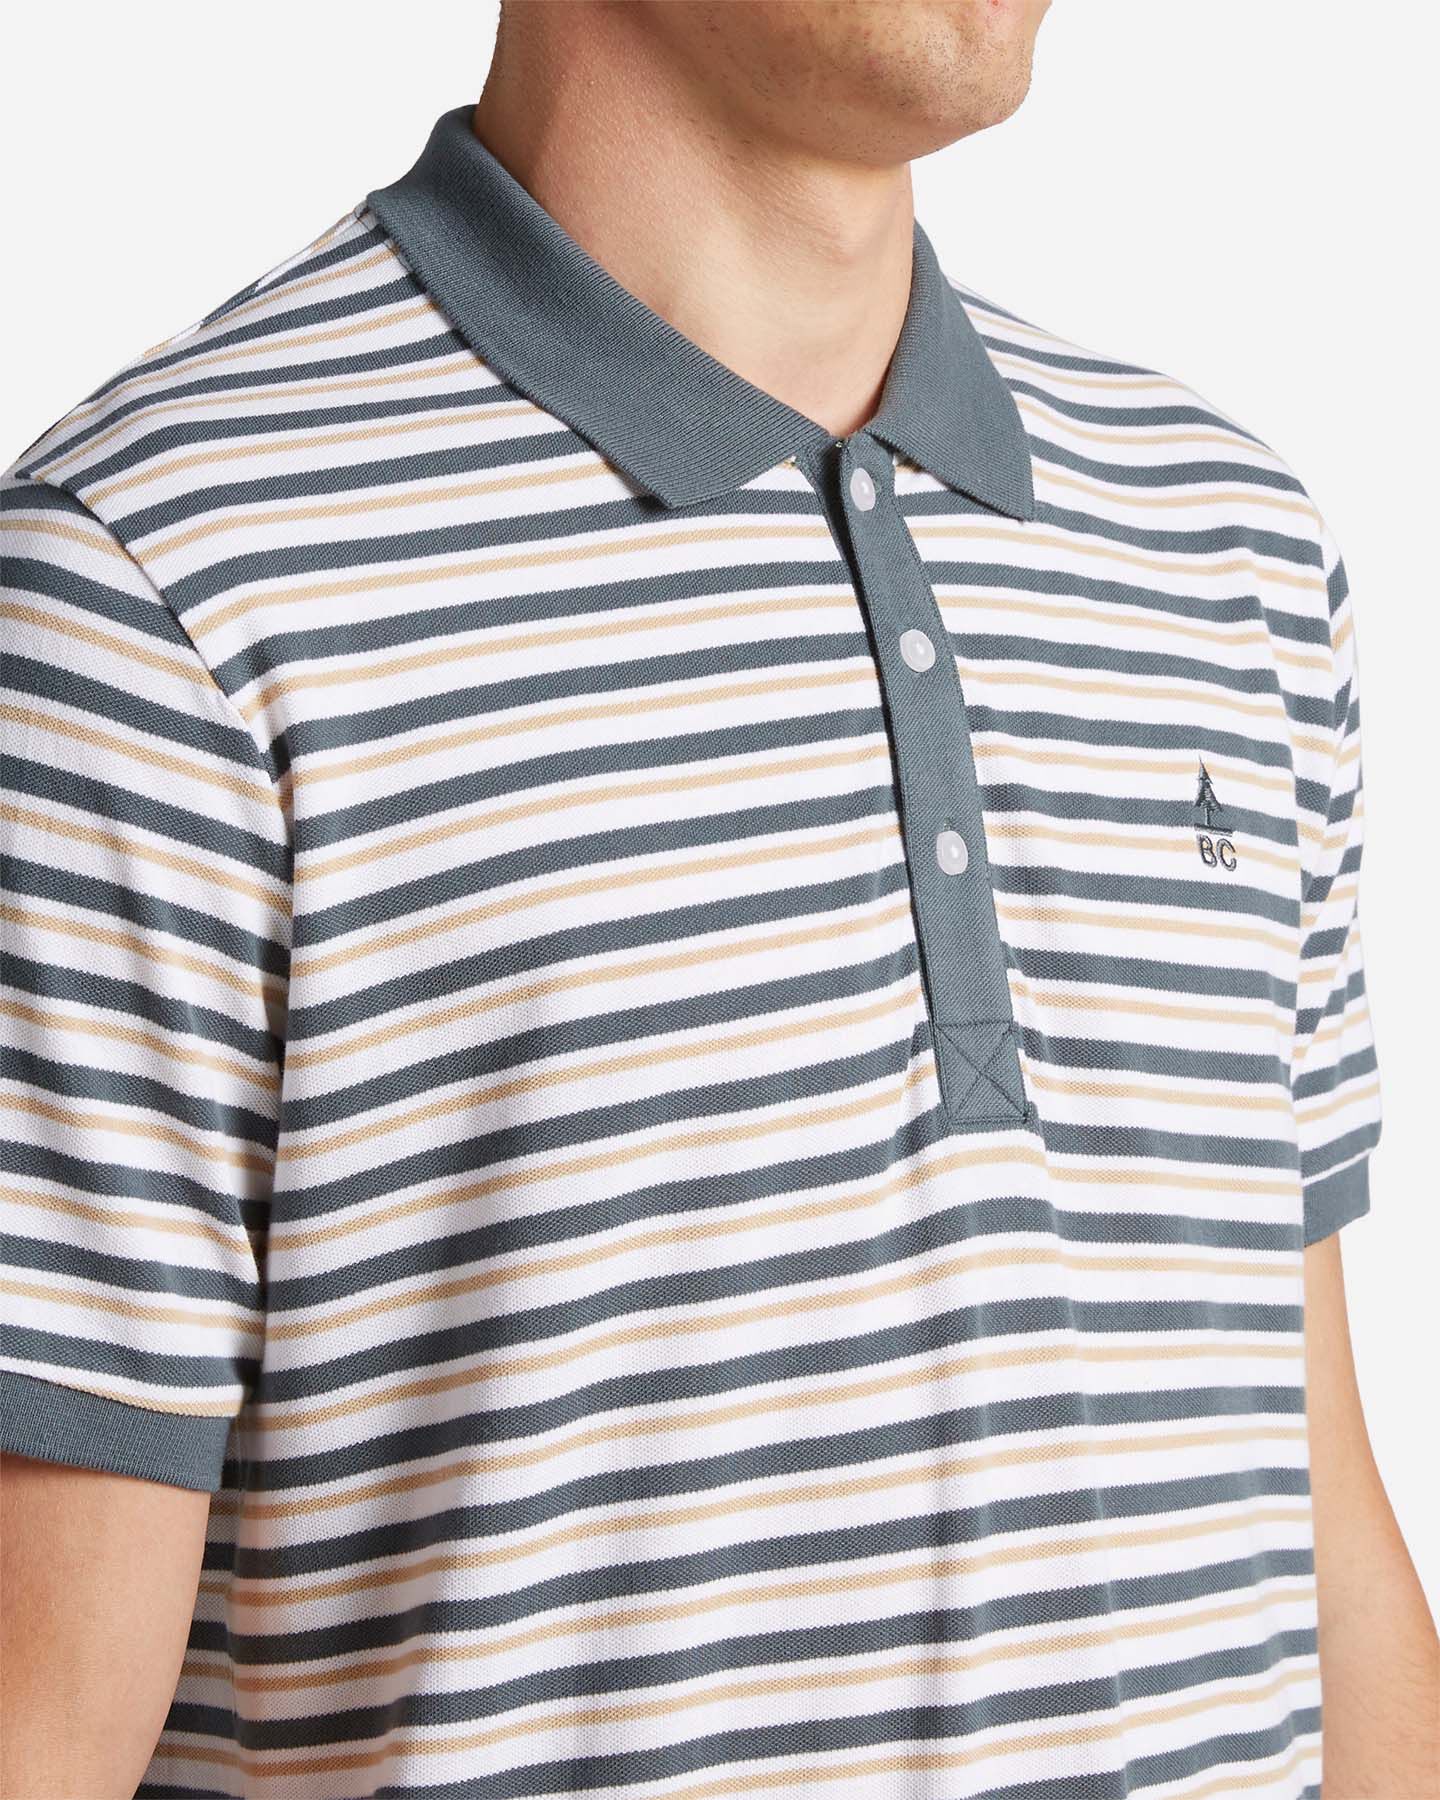  Polo BEST COMPANY HERITAGE M S4122349|790A|XXL scatto 4